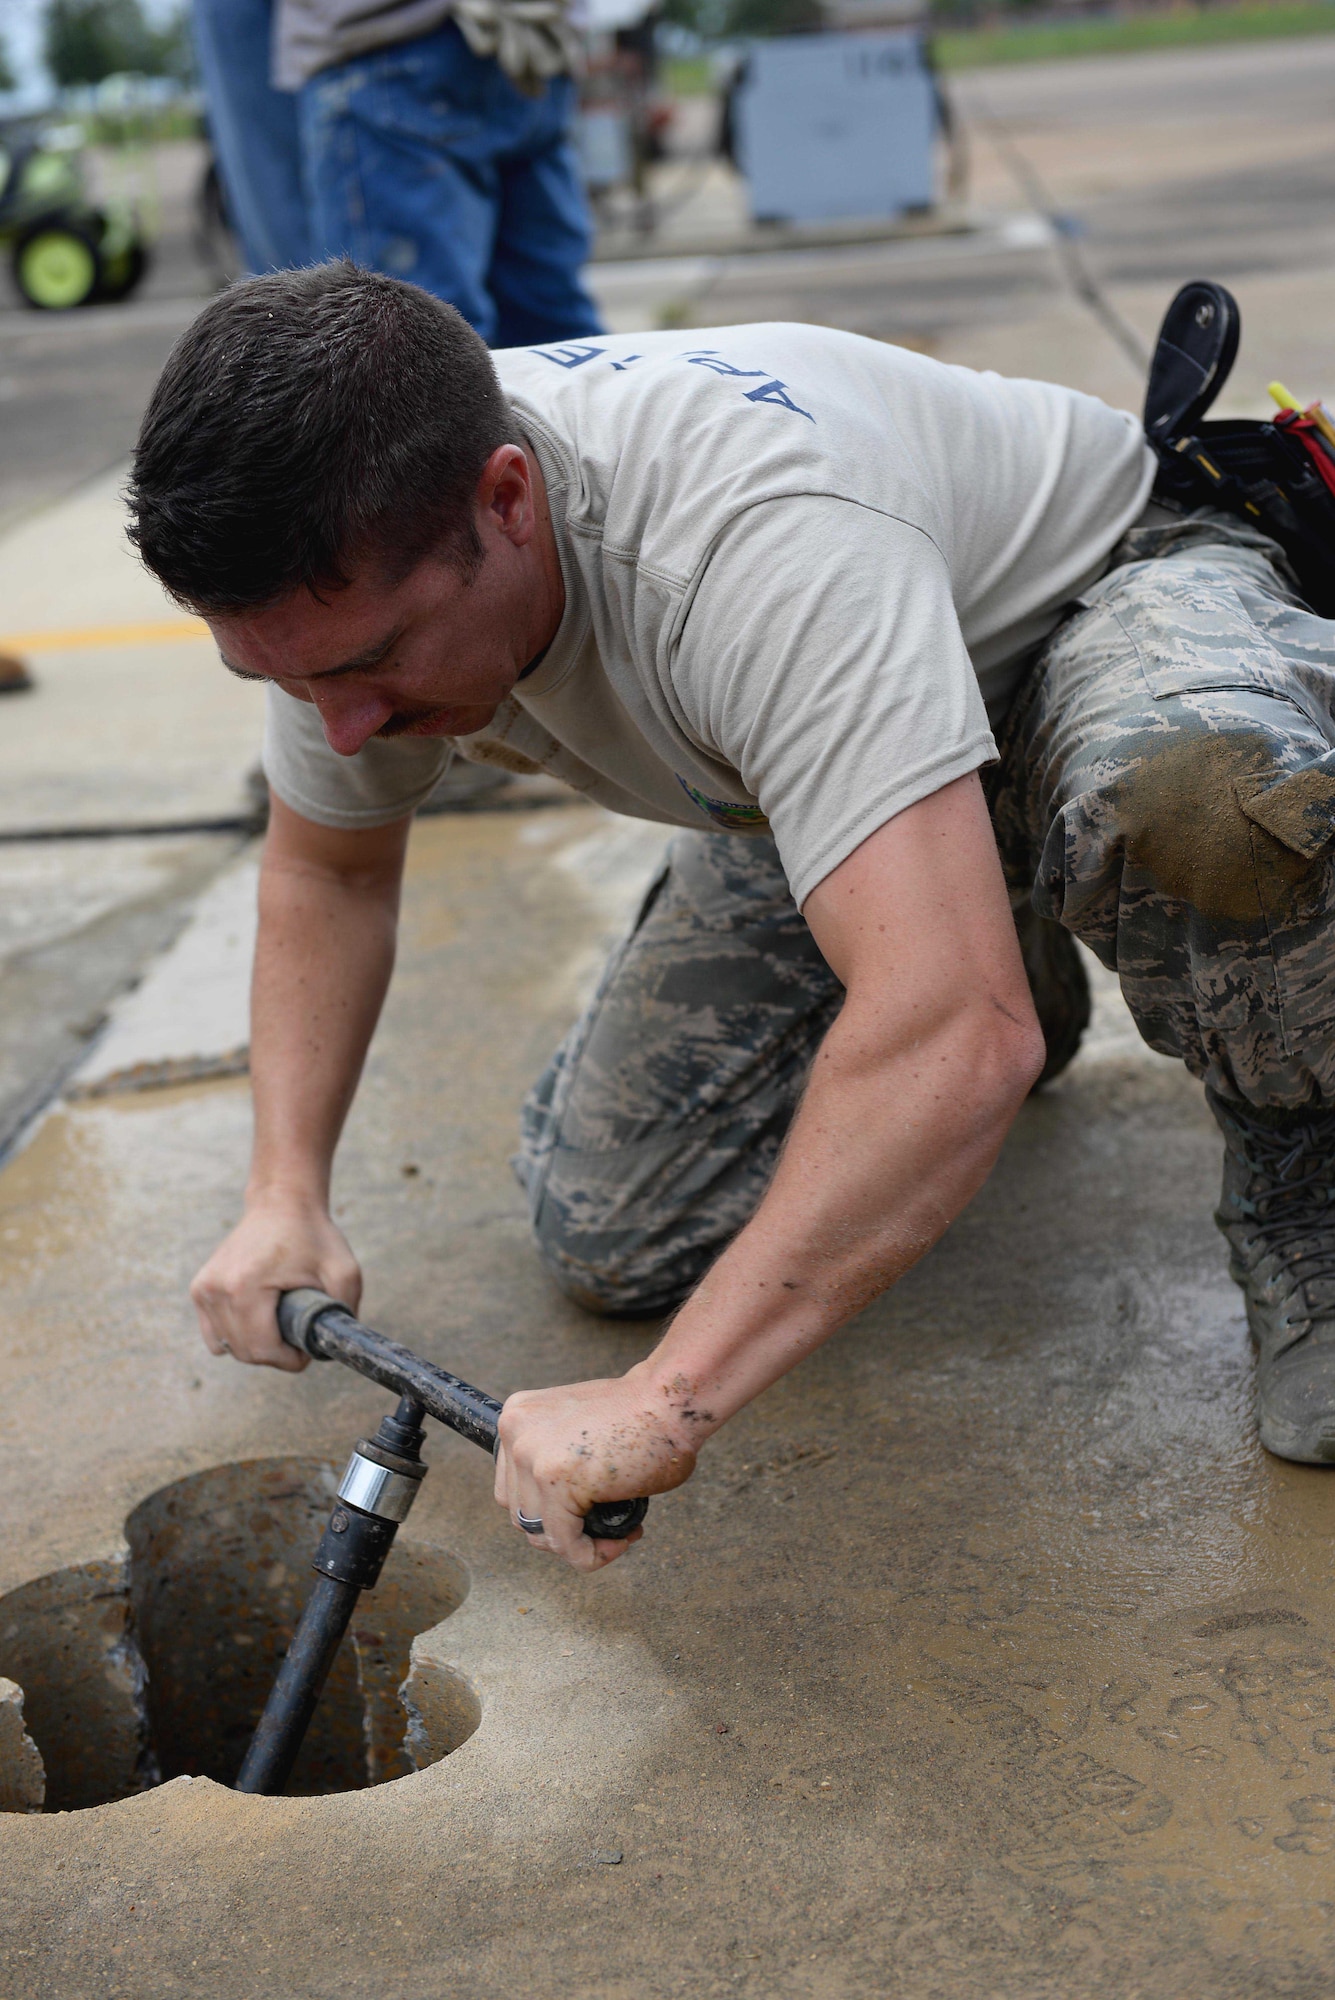 Capt. John Kulikowski, Air Force Civil Engineer Center APE Team Branch Chief, from Tyndall Air Force Base, Florida, inspects a hole on the airfield at Columbus Air Force Base, Mississippi, Oct. 11, 2017. A void under the T-1A Jayhawk parking ramp was determined to be roughly 50 feet in diameter and almost 4 feet deep, and was a result of water flowing underneath the concrete for many years, eroding the dirt below. (U.S. Air Force photo by Airman 1st Class Keith Holcomb)